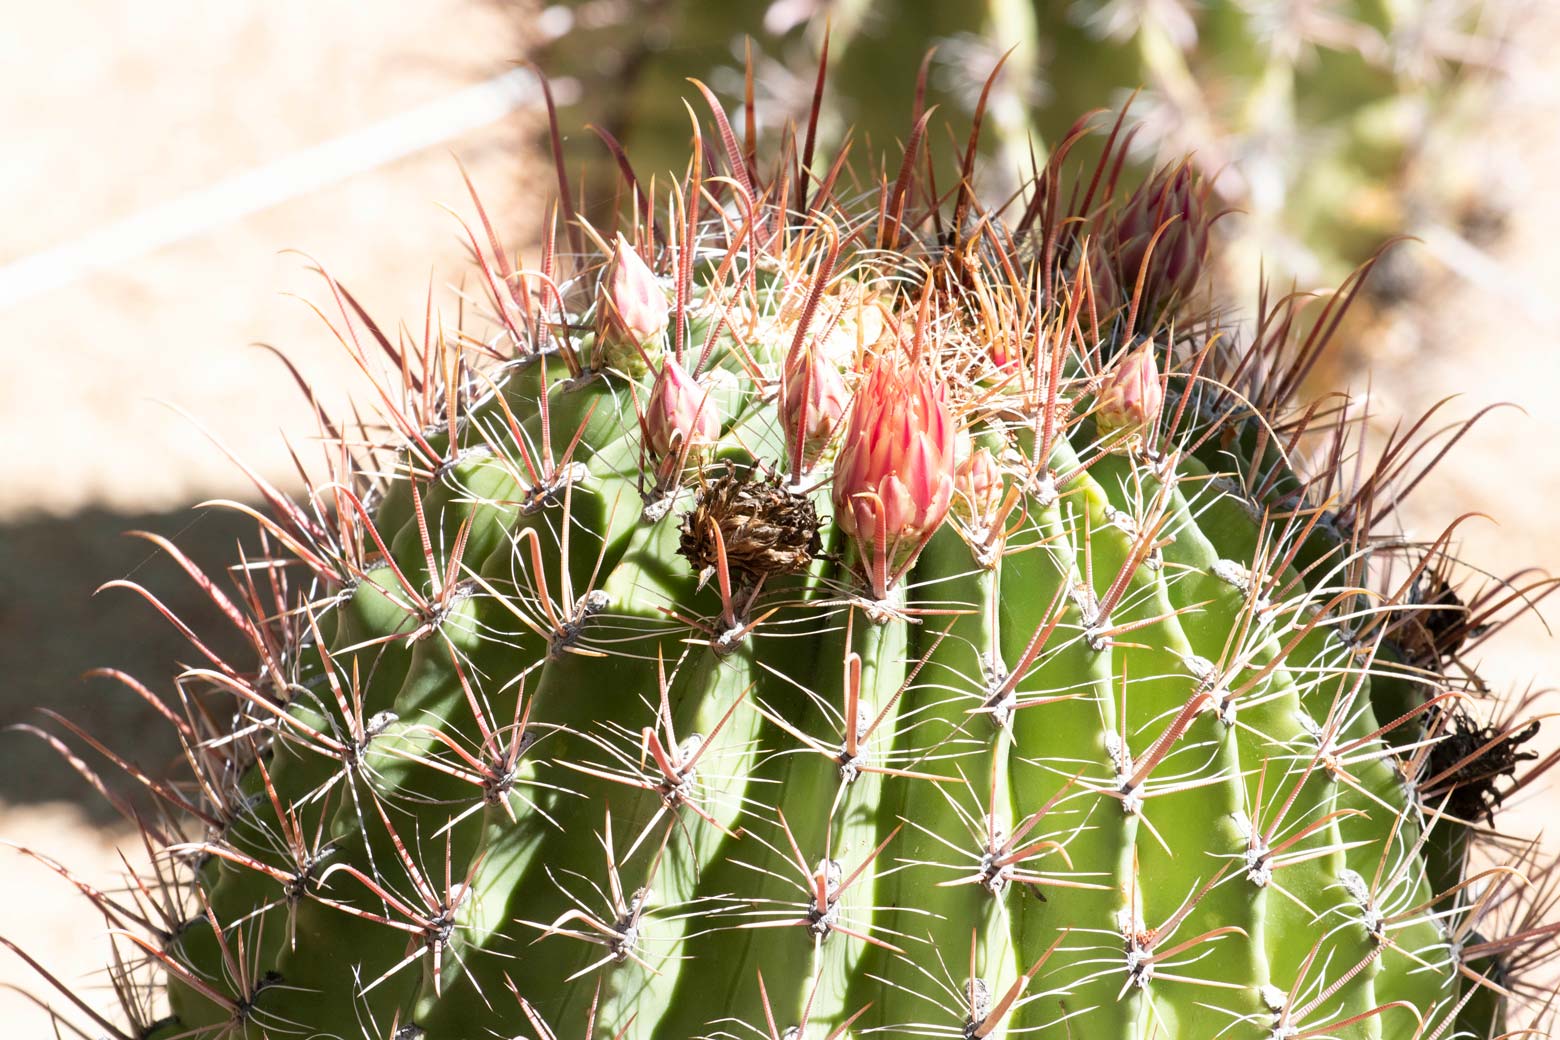 A close-up of the Fish Hook cactus with pink flowers.